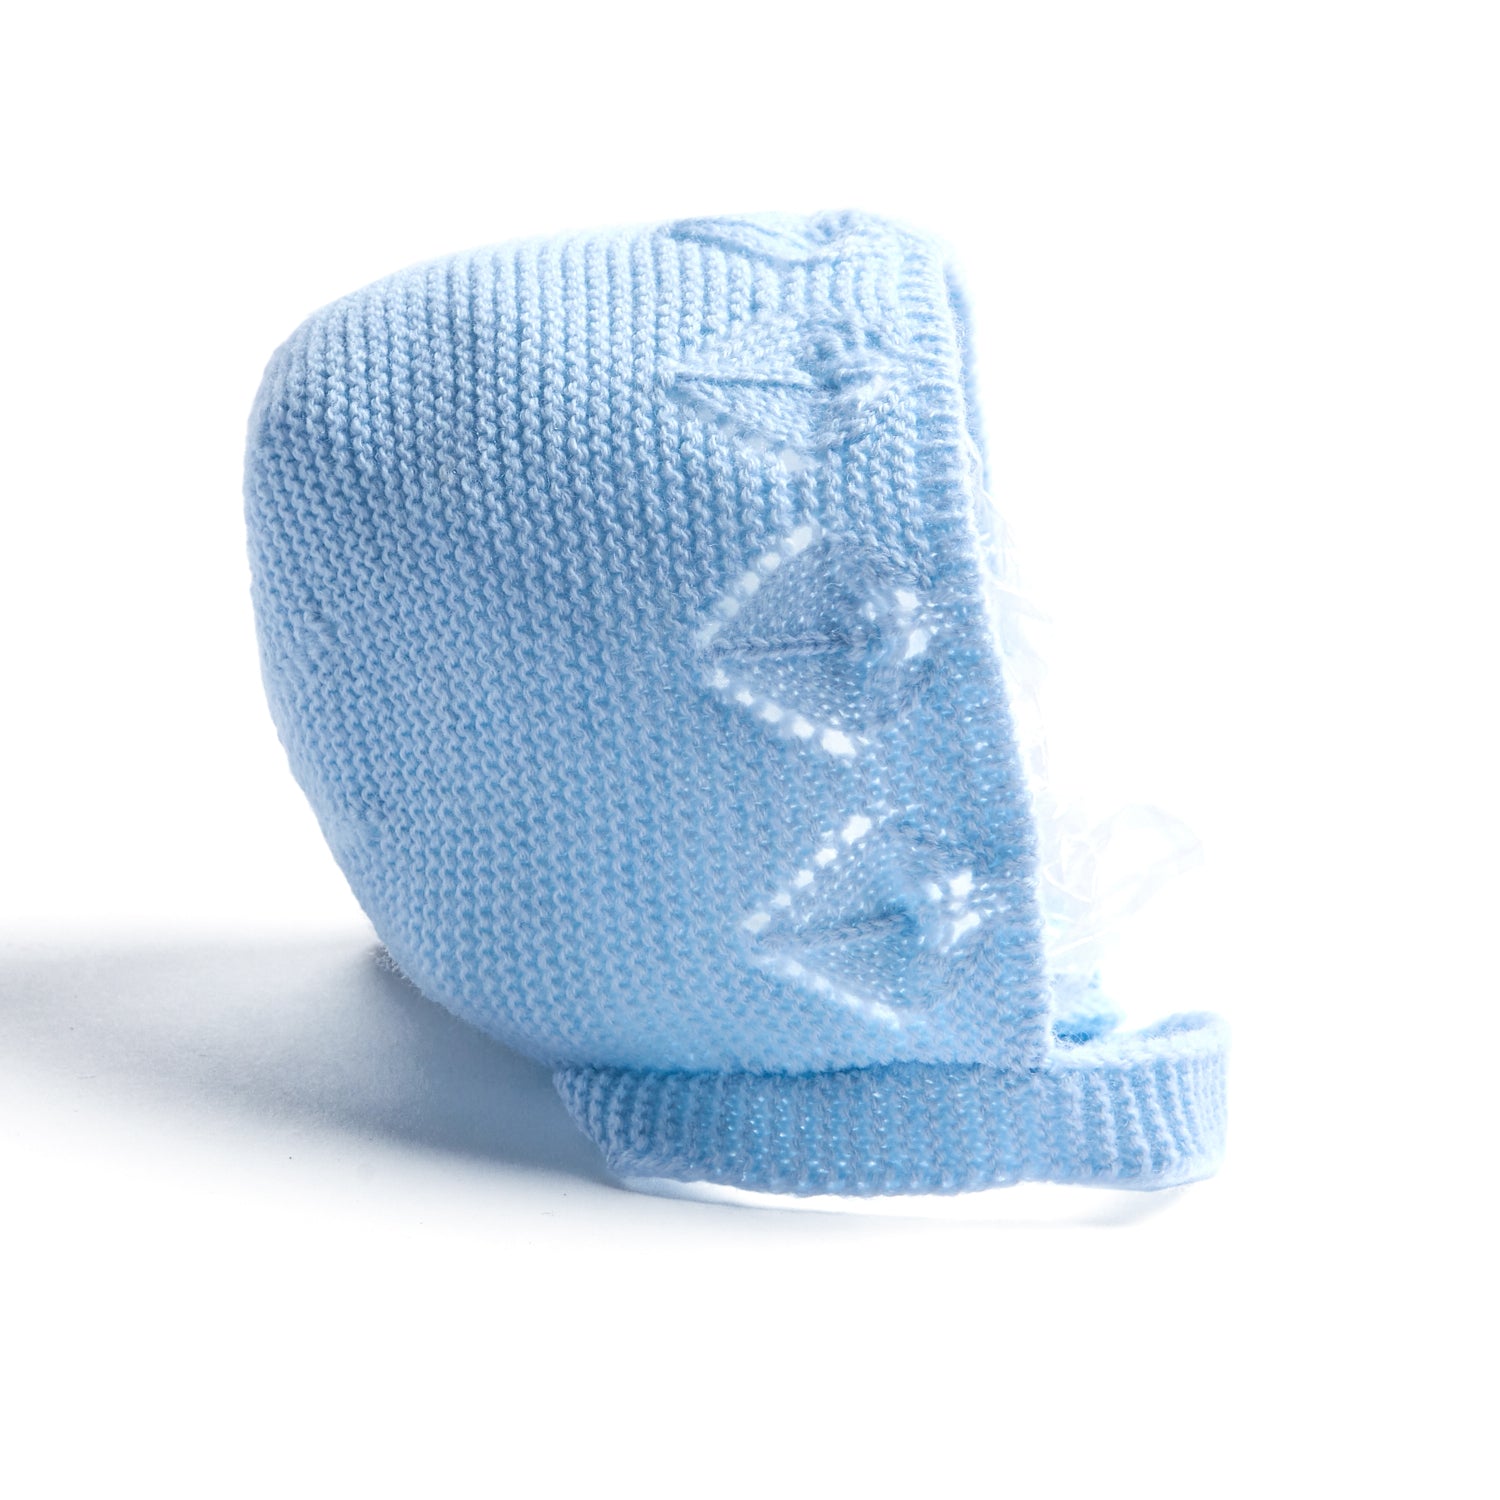 Blue Knitted Openwork Bonnet Knitted Accessories  from Pepa London